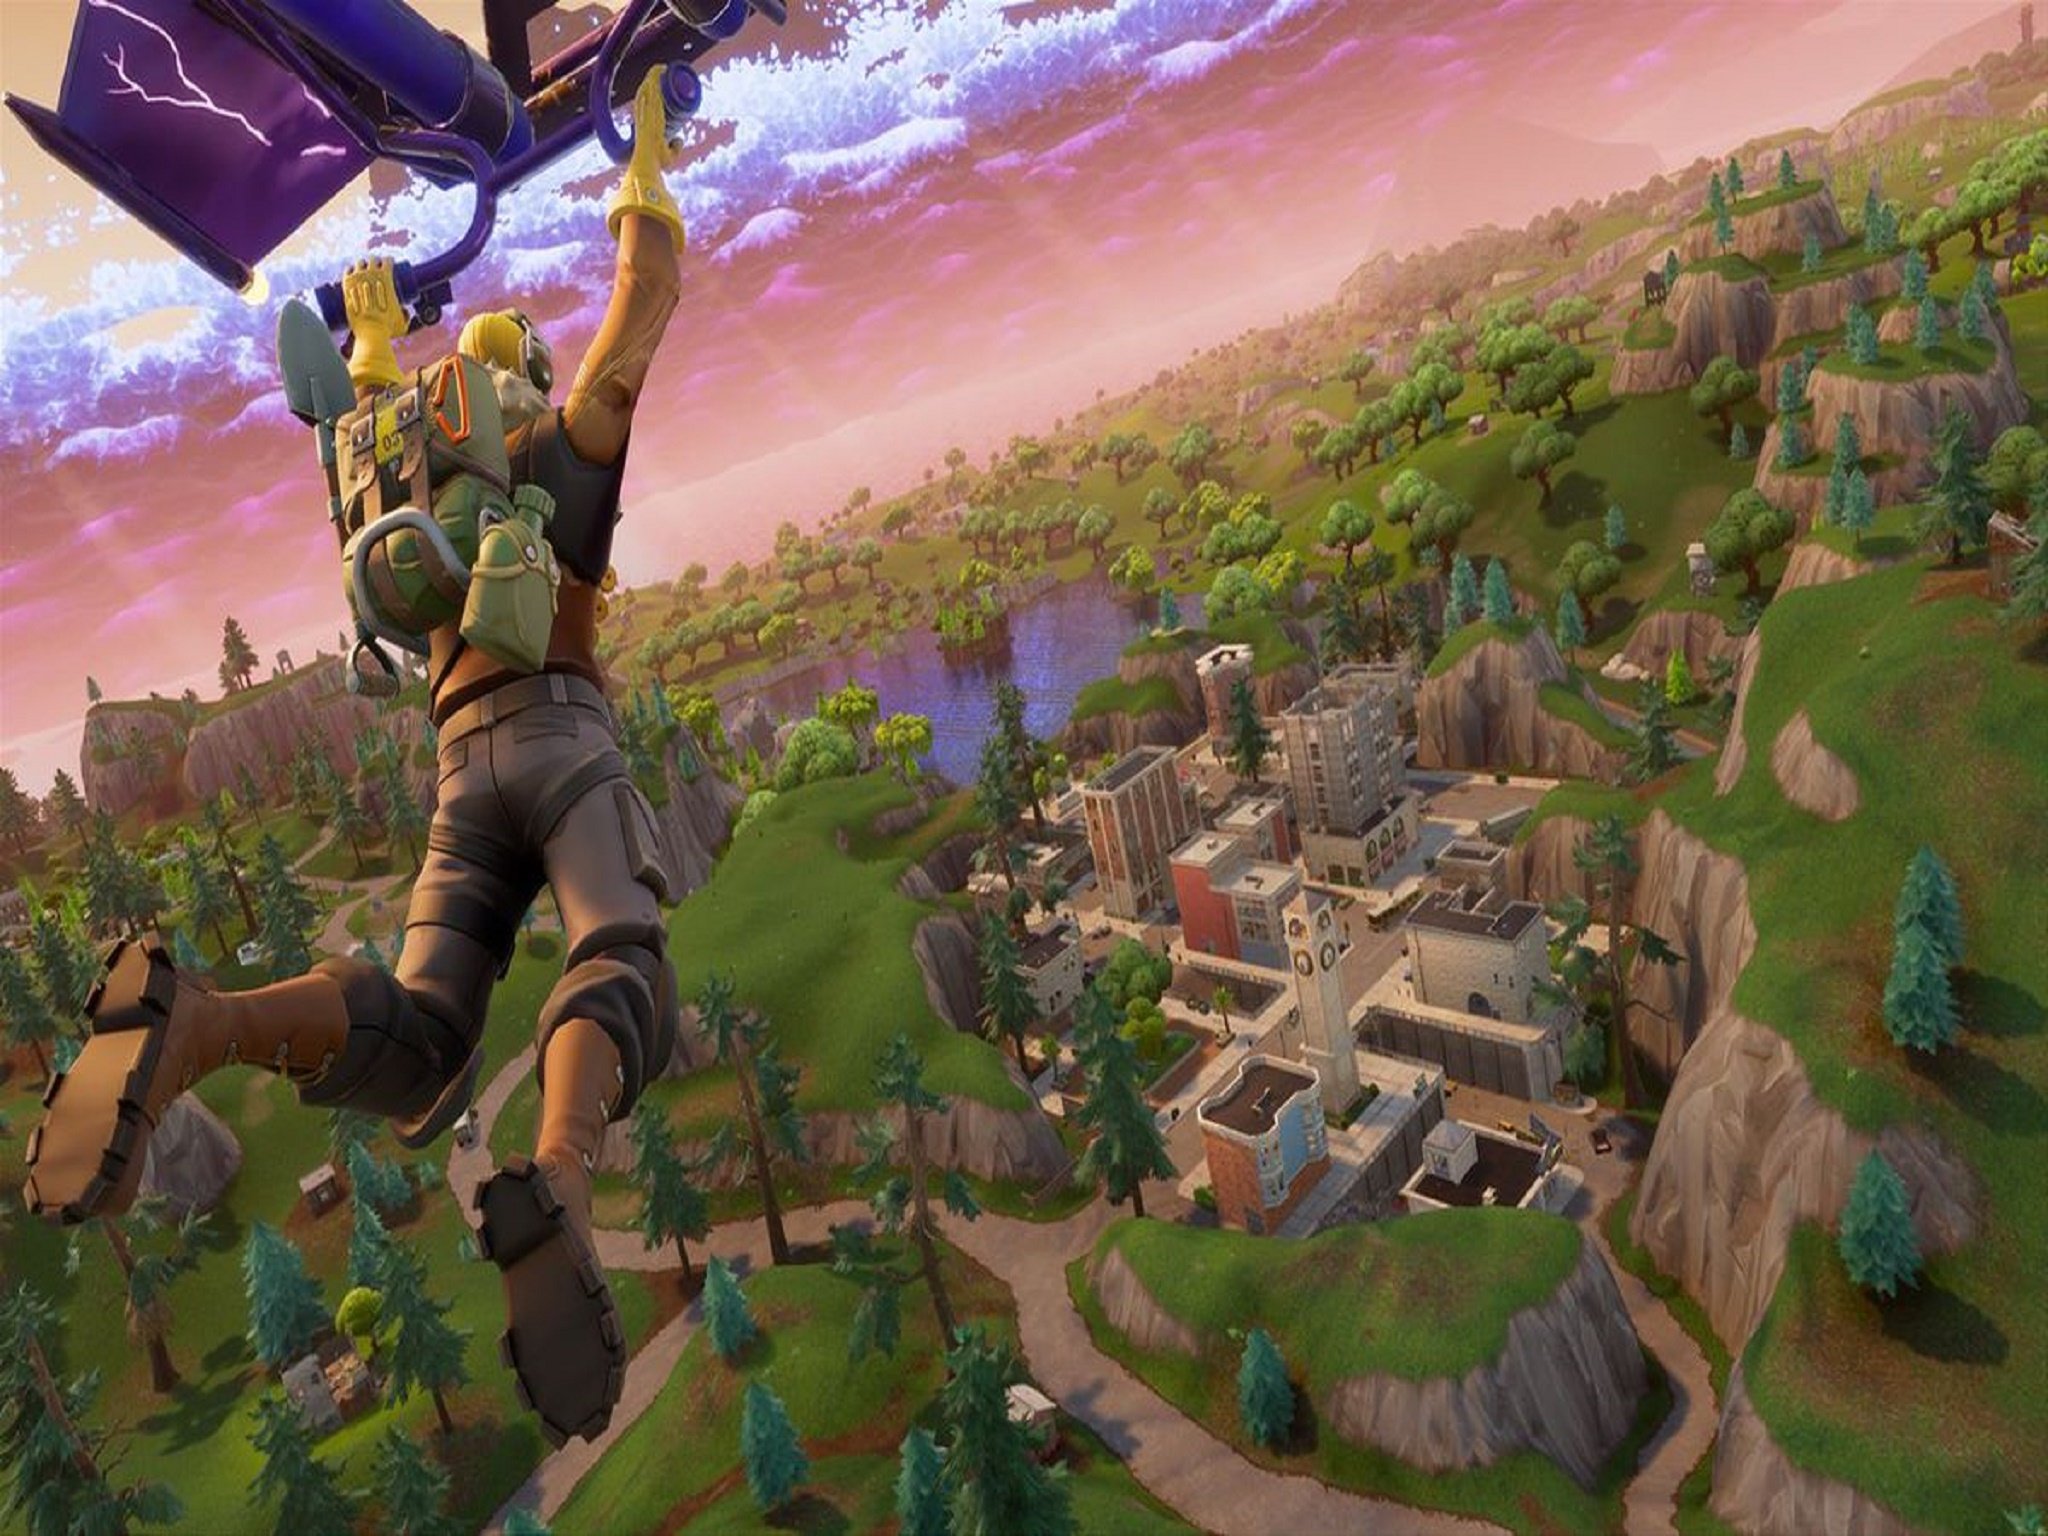 epic games working on unlinking fortnite accounts from consoles merge purchases - fortnite keeps freezing on loading screen